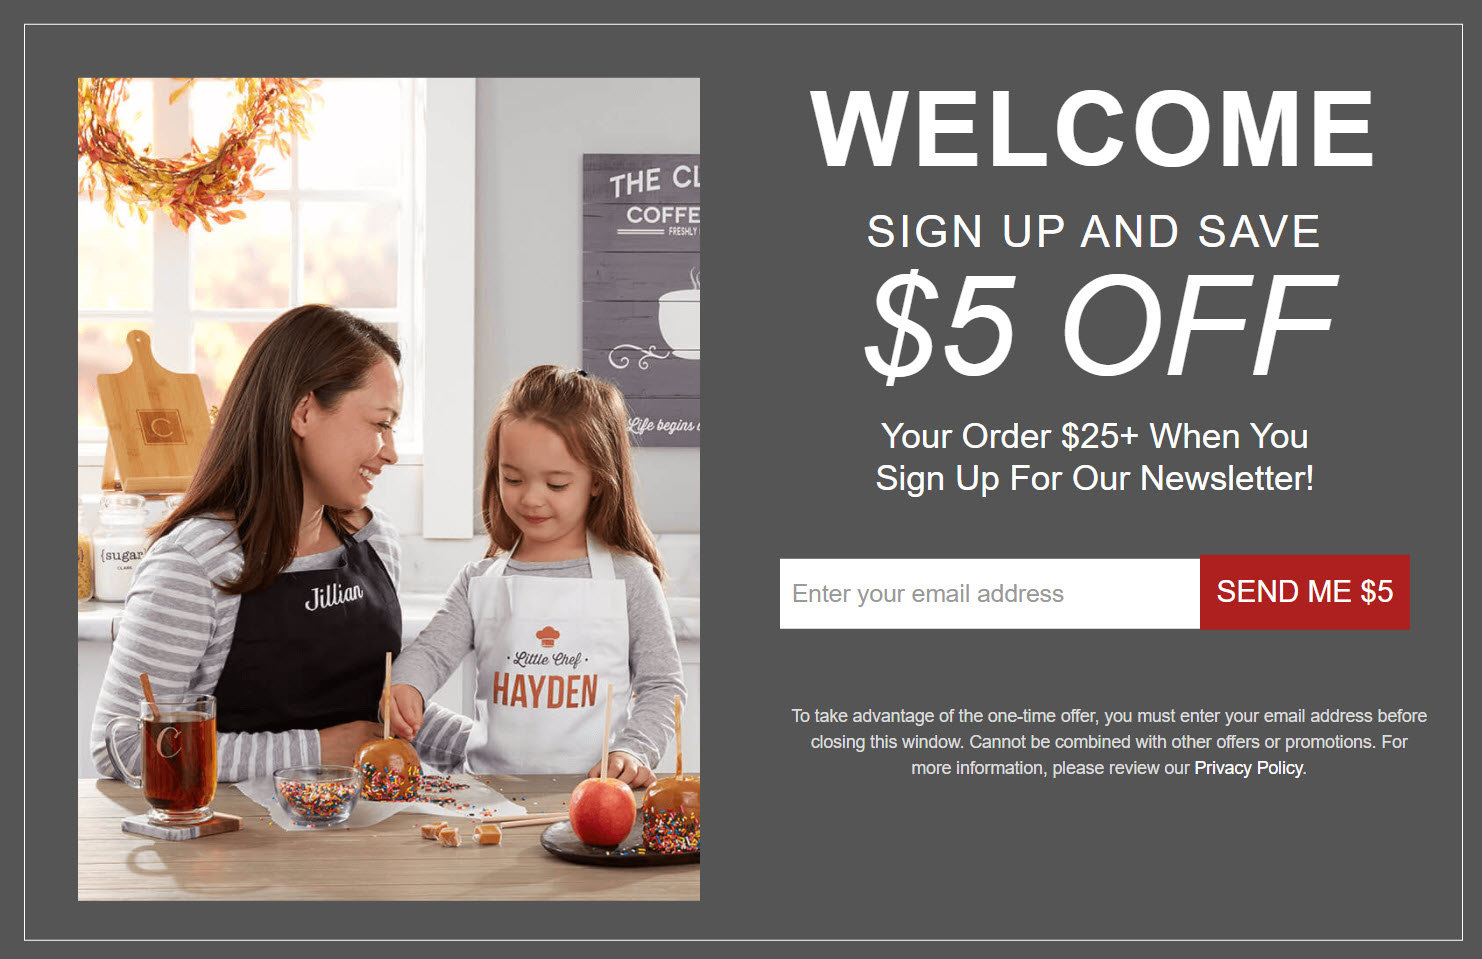 [100 Legit] Latest Personalization Mall Coupons 2024 Super Easy